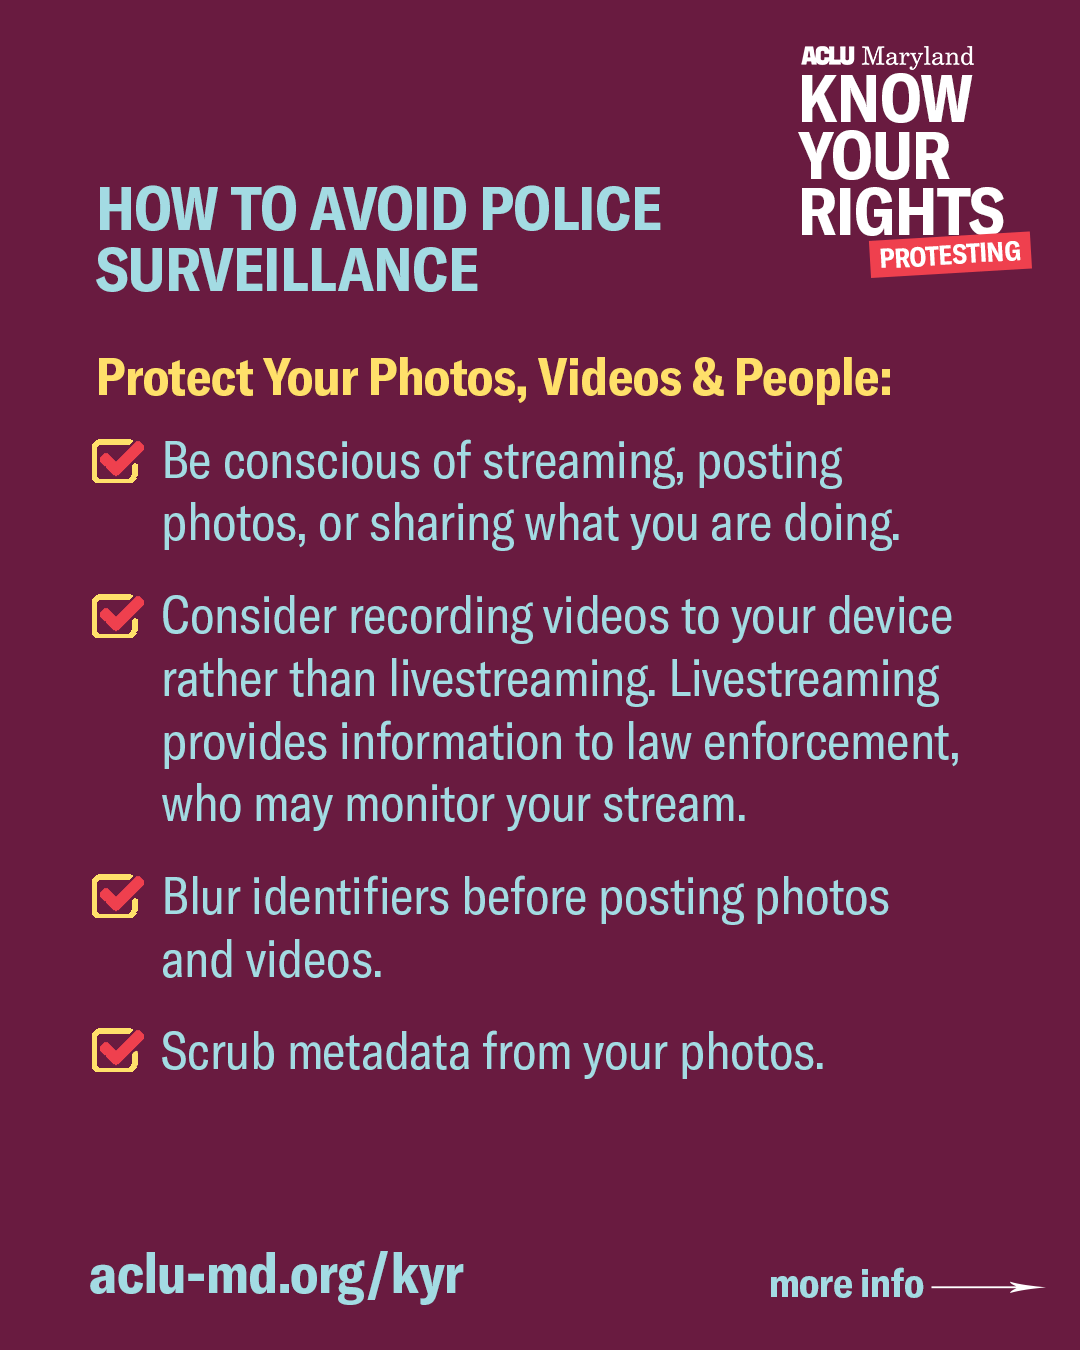 How to avoid police surveillance - protect your photos, videos, and people.